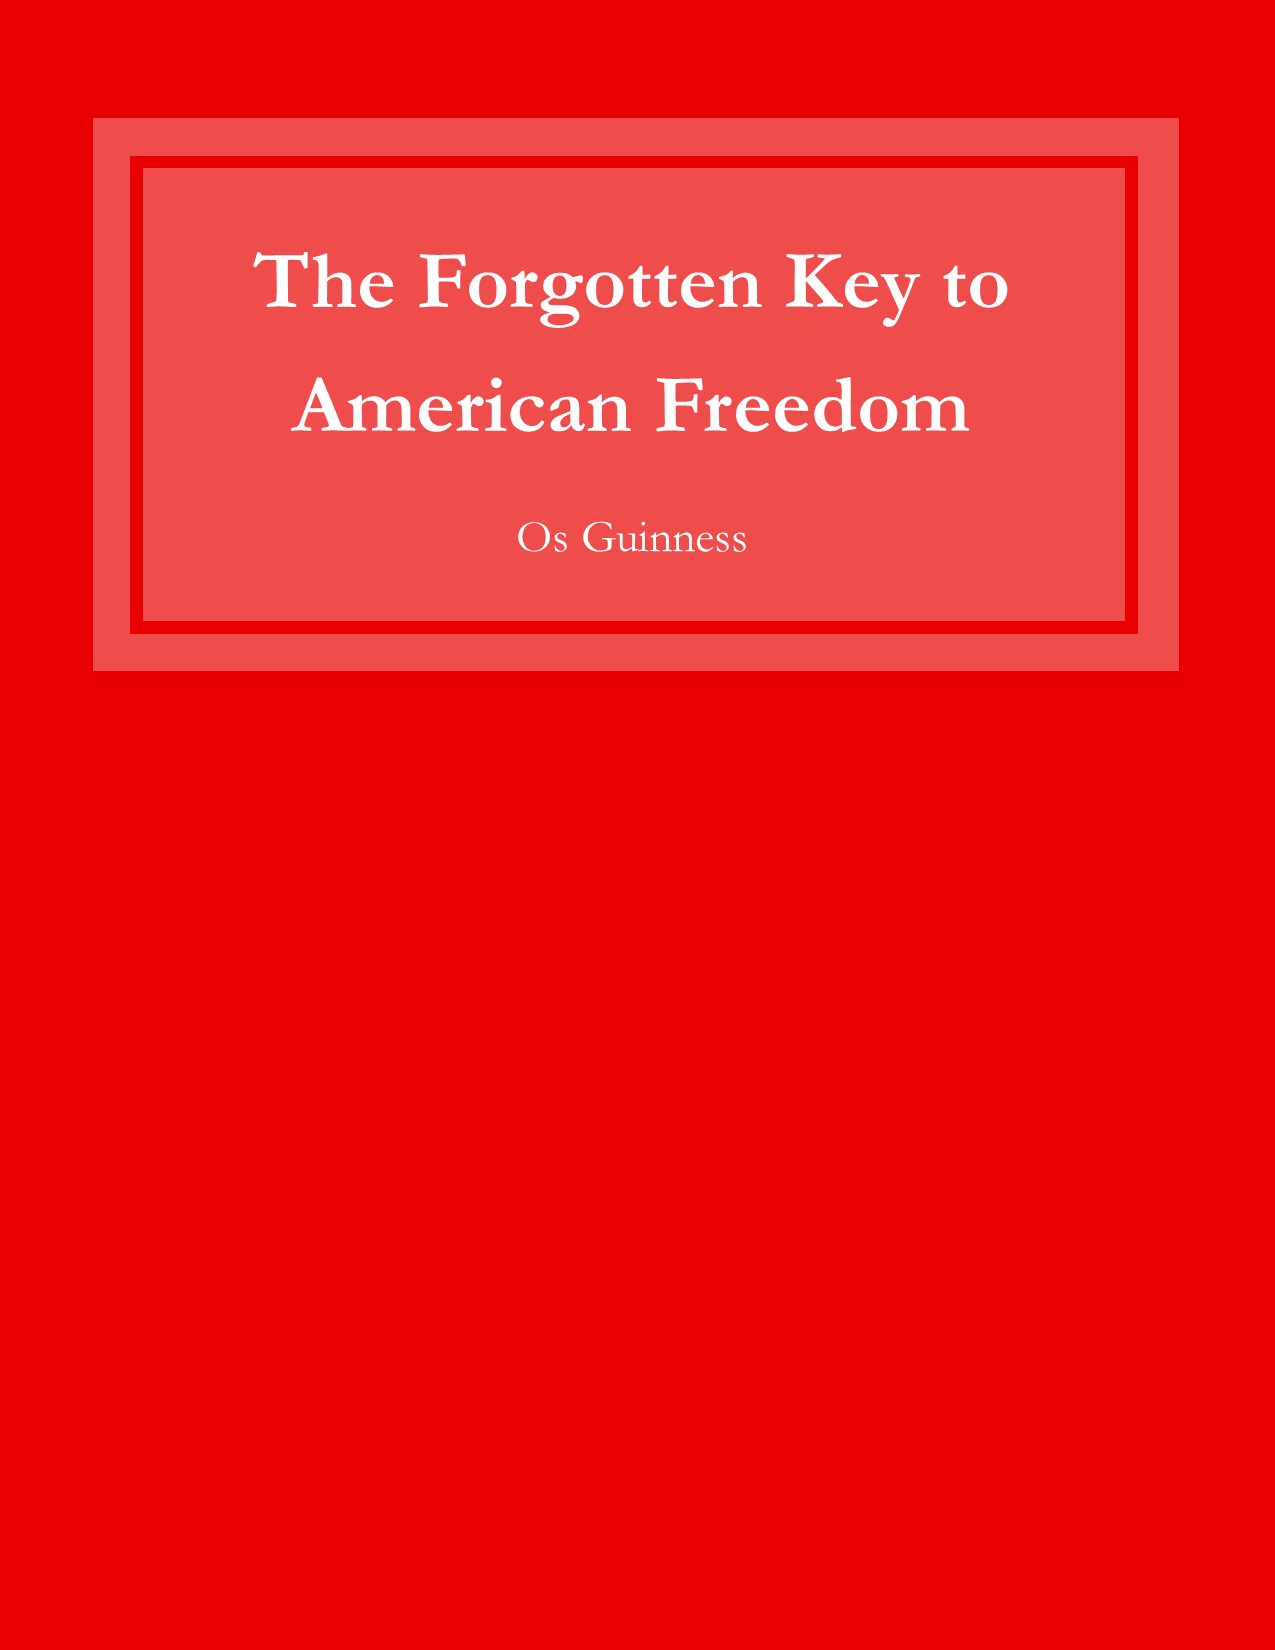 The Forgotten Key to American Freedom